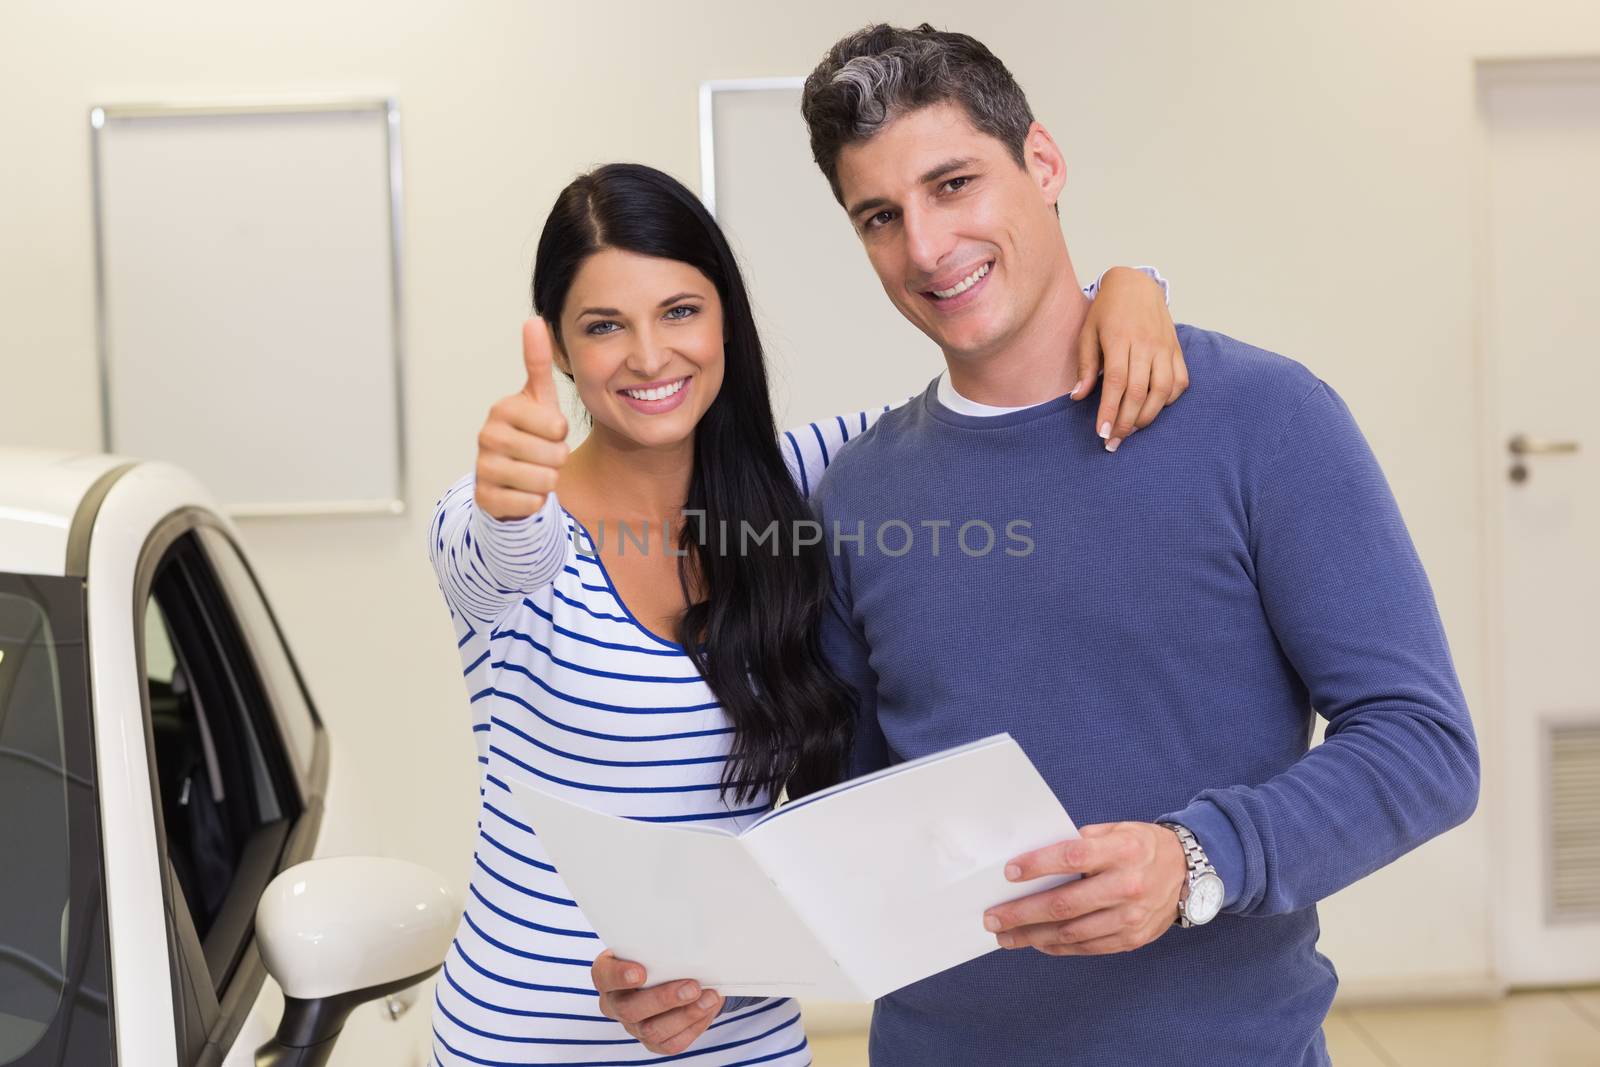 Smiling woman giving thumbs up by Wavebreakmedia